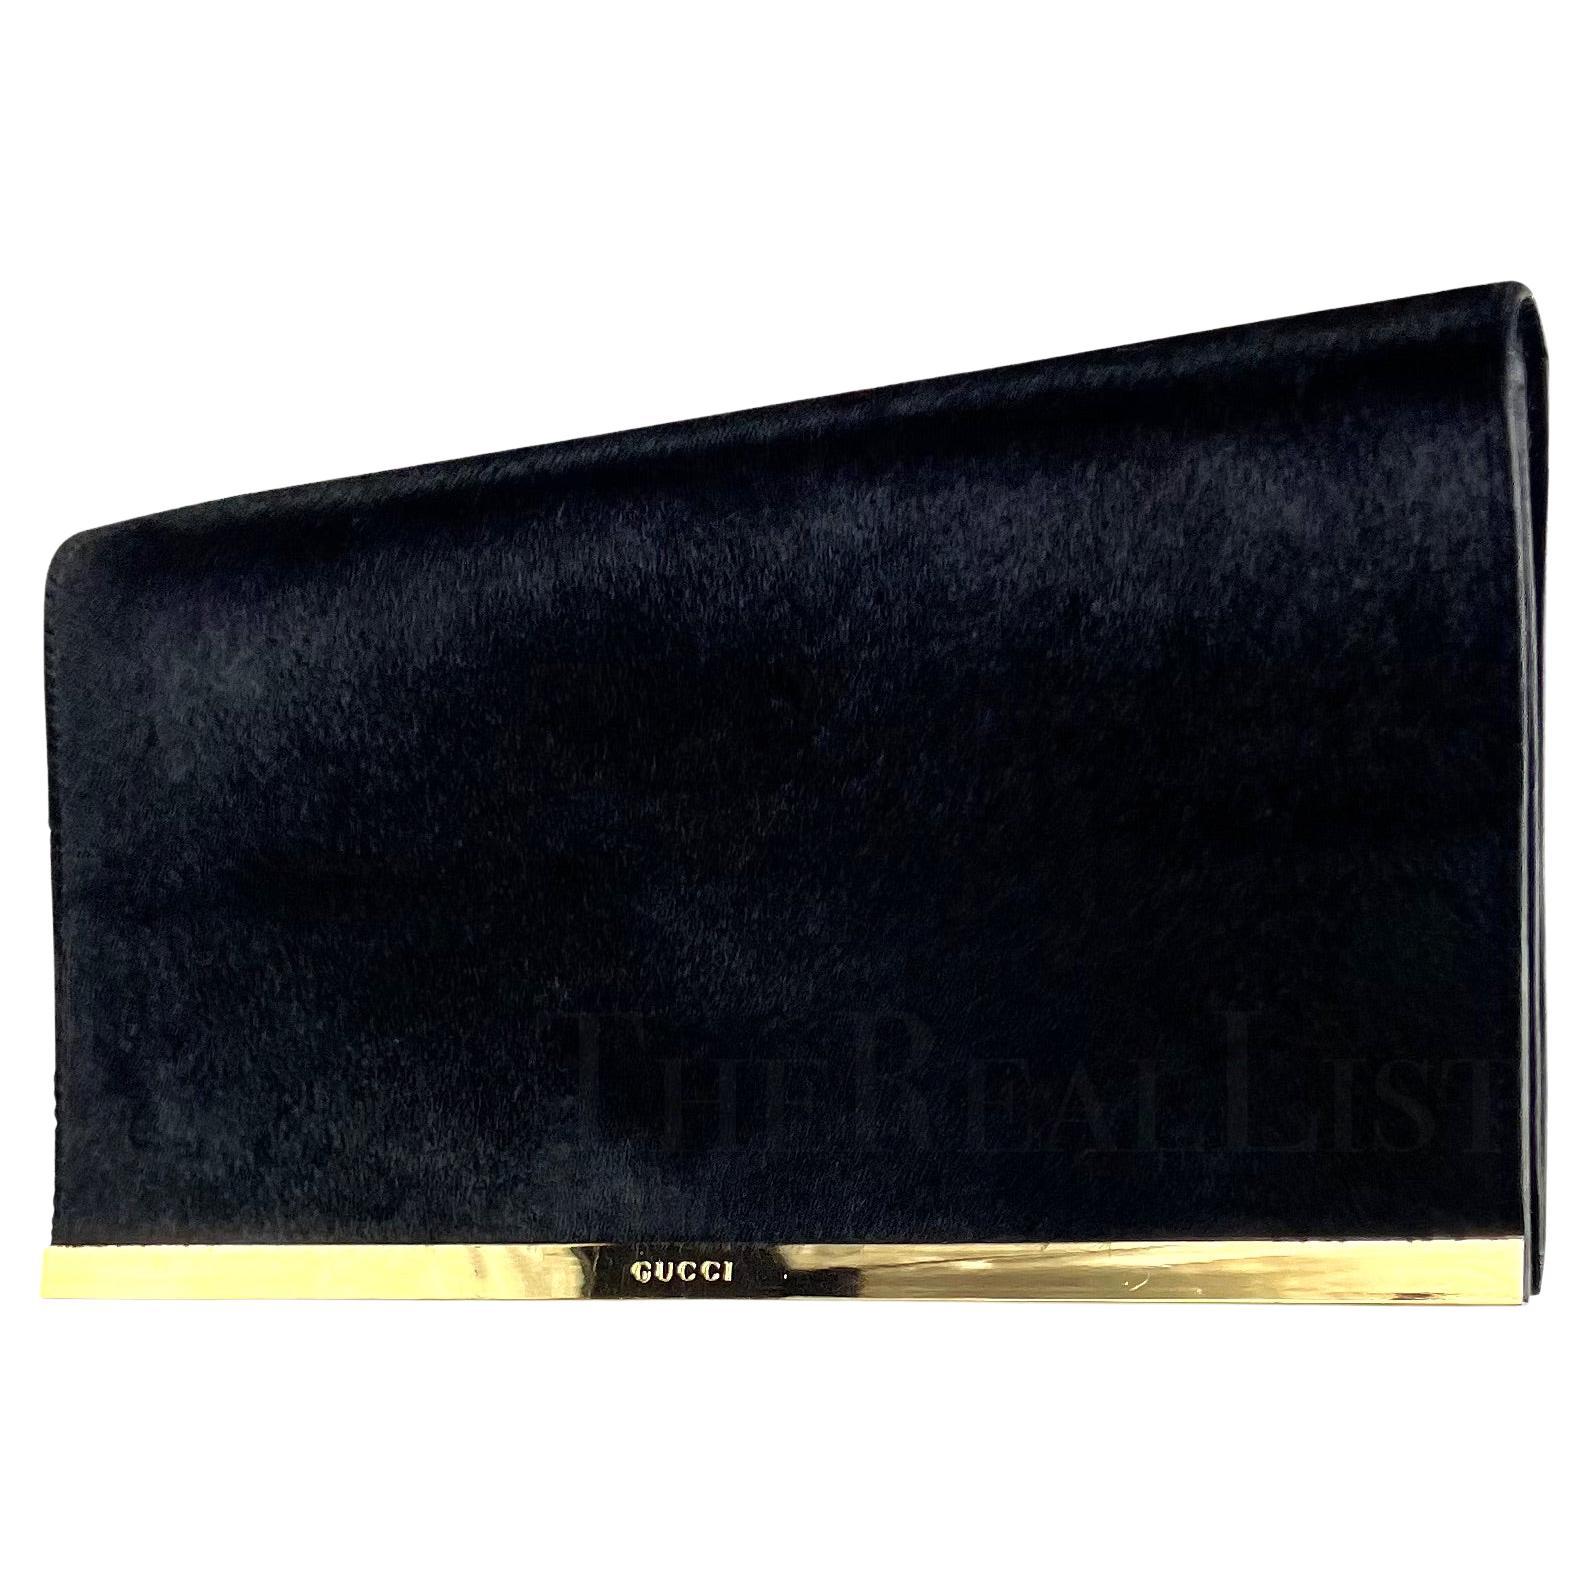 F/W 1996 Gucci by Tom Ford Black Pony Hair Fold-Over Clutch In Excellent Condition For Sale In West Hollywood, CA